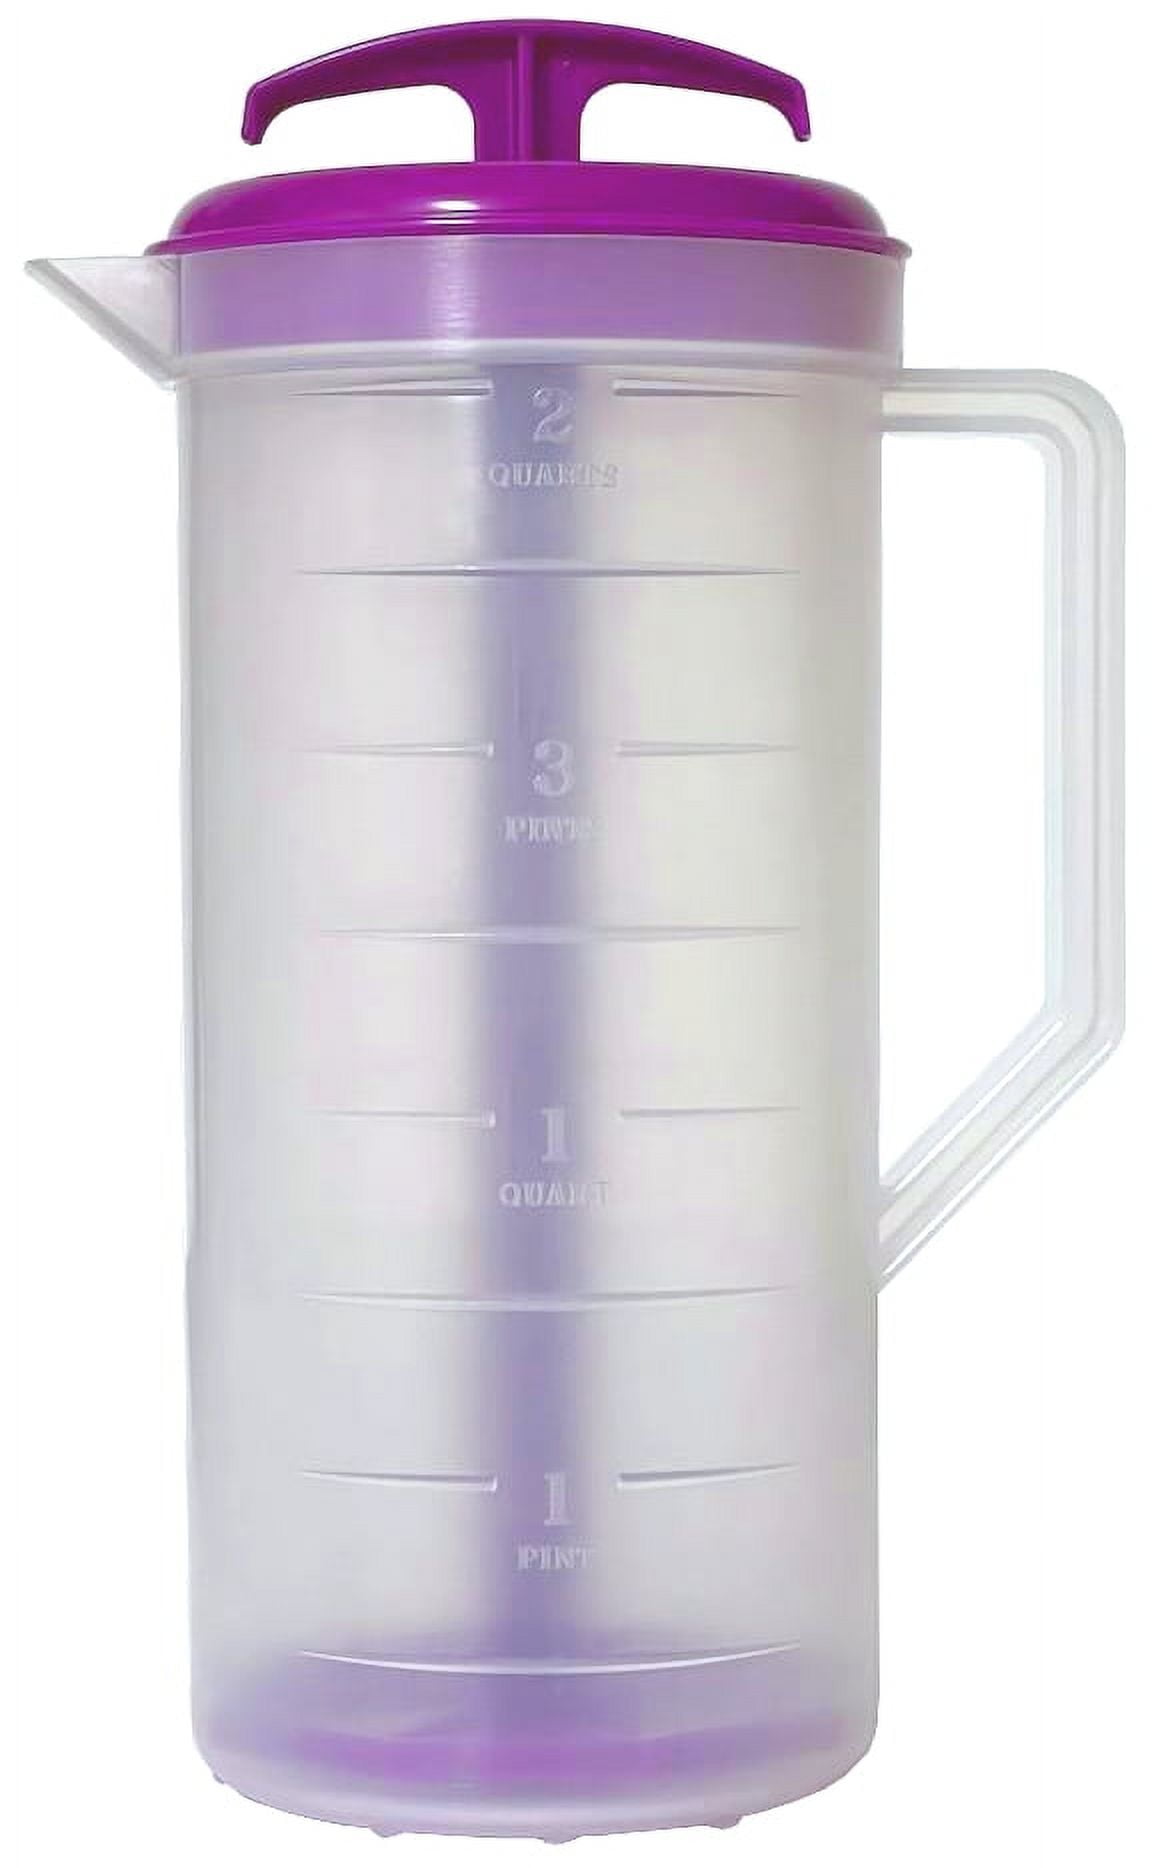 mixing pitcher, mixing pitcher Suppliers and Manufacturers at